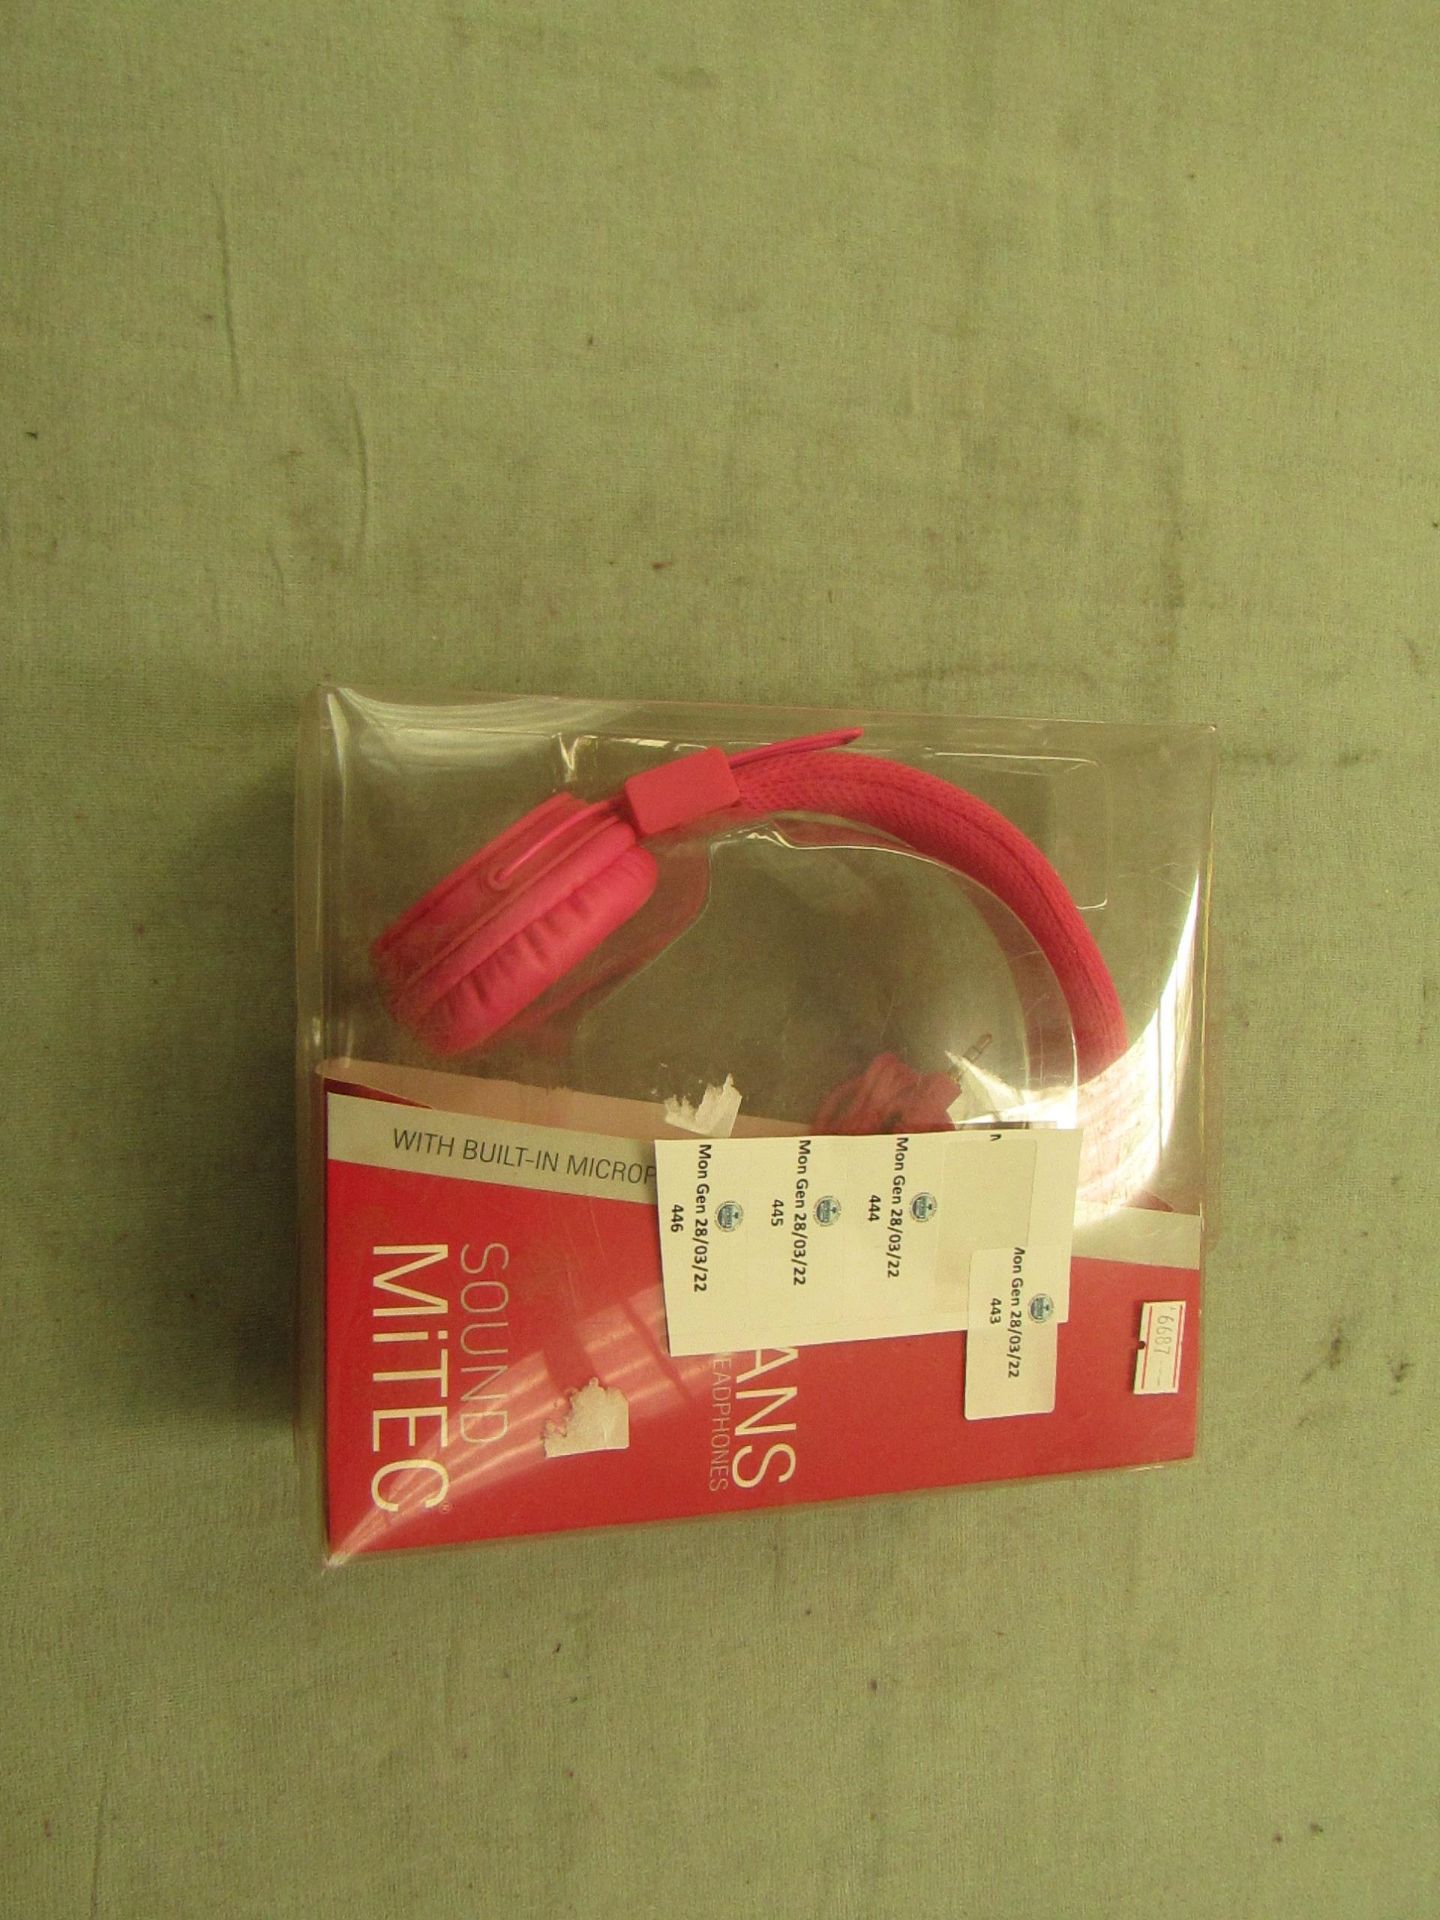 ICANS - Sound MiTEC Wired Headphones With Built-In Microphone - Pink - Unused & Packaged.